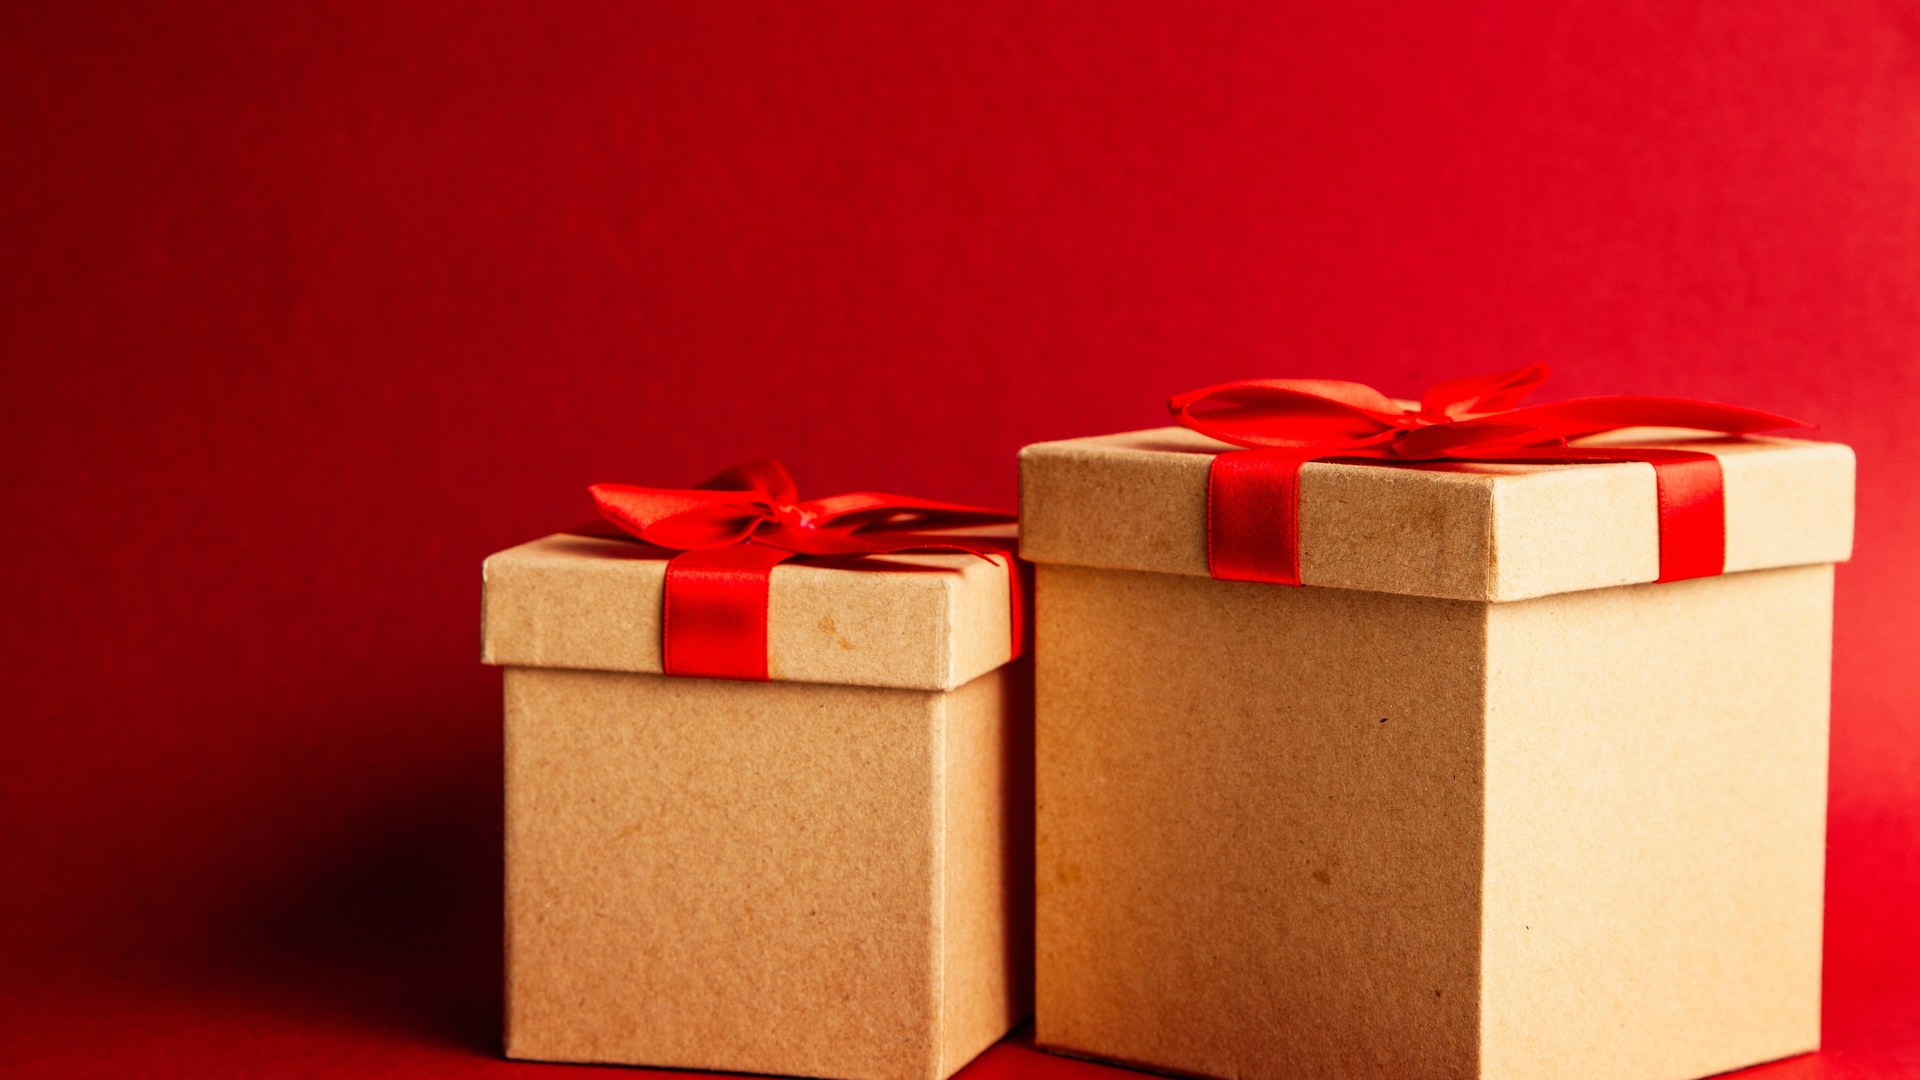 two-brown-and-red-gift-boxes-on-red-surface-1666070